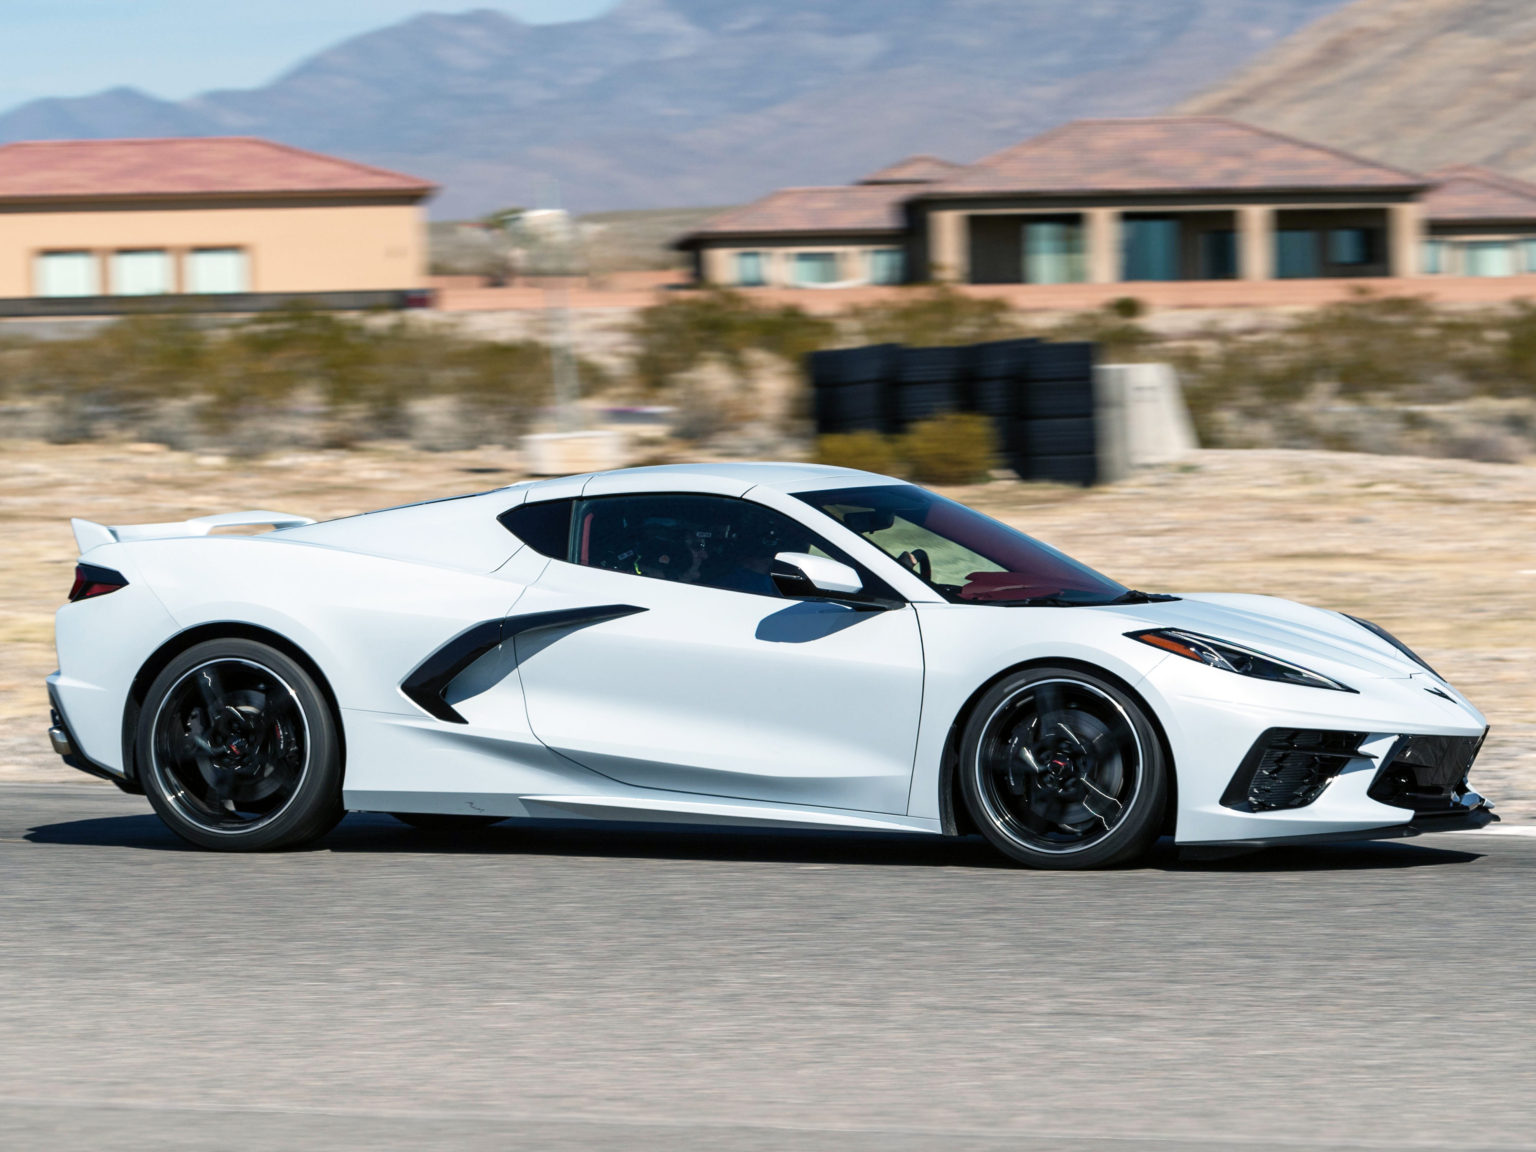 Hennessey Performance has once again showed off the capability of the Corvette.